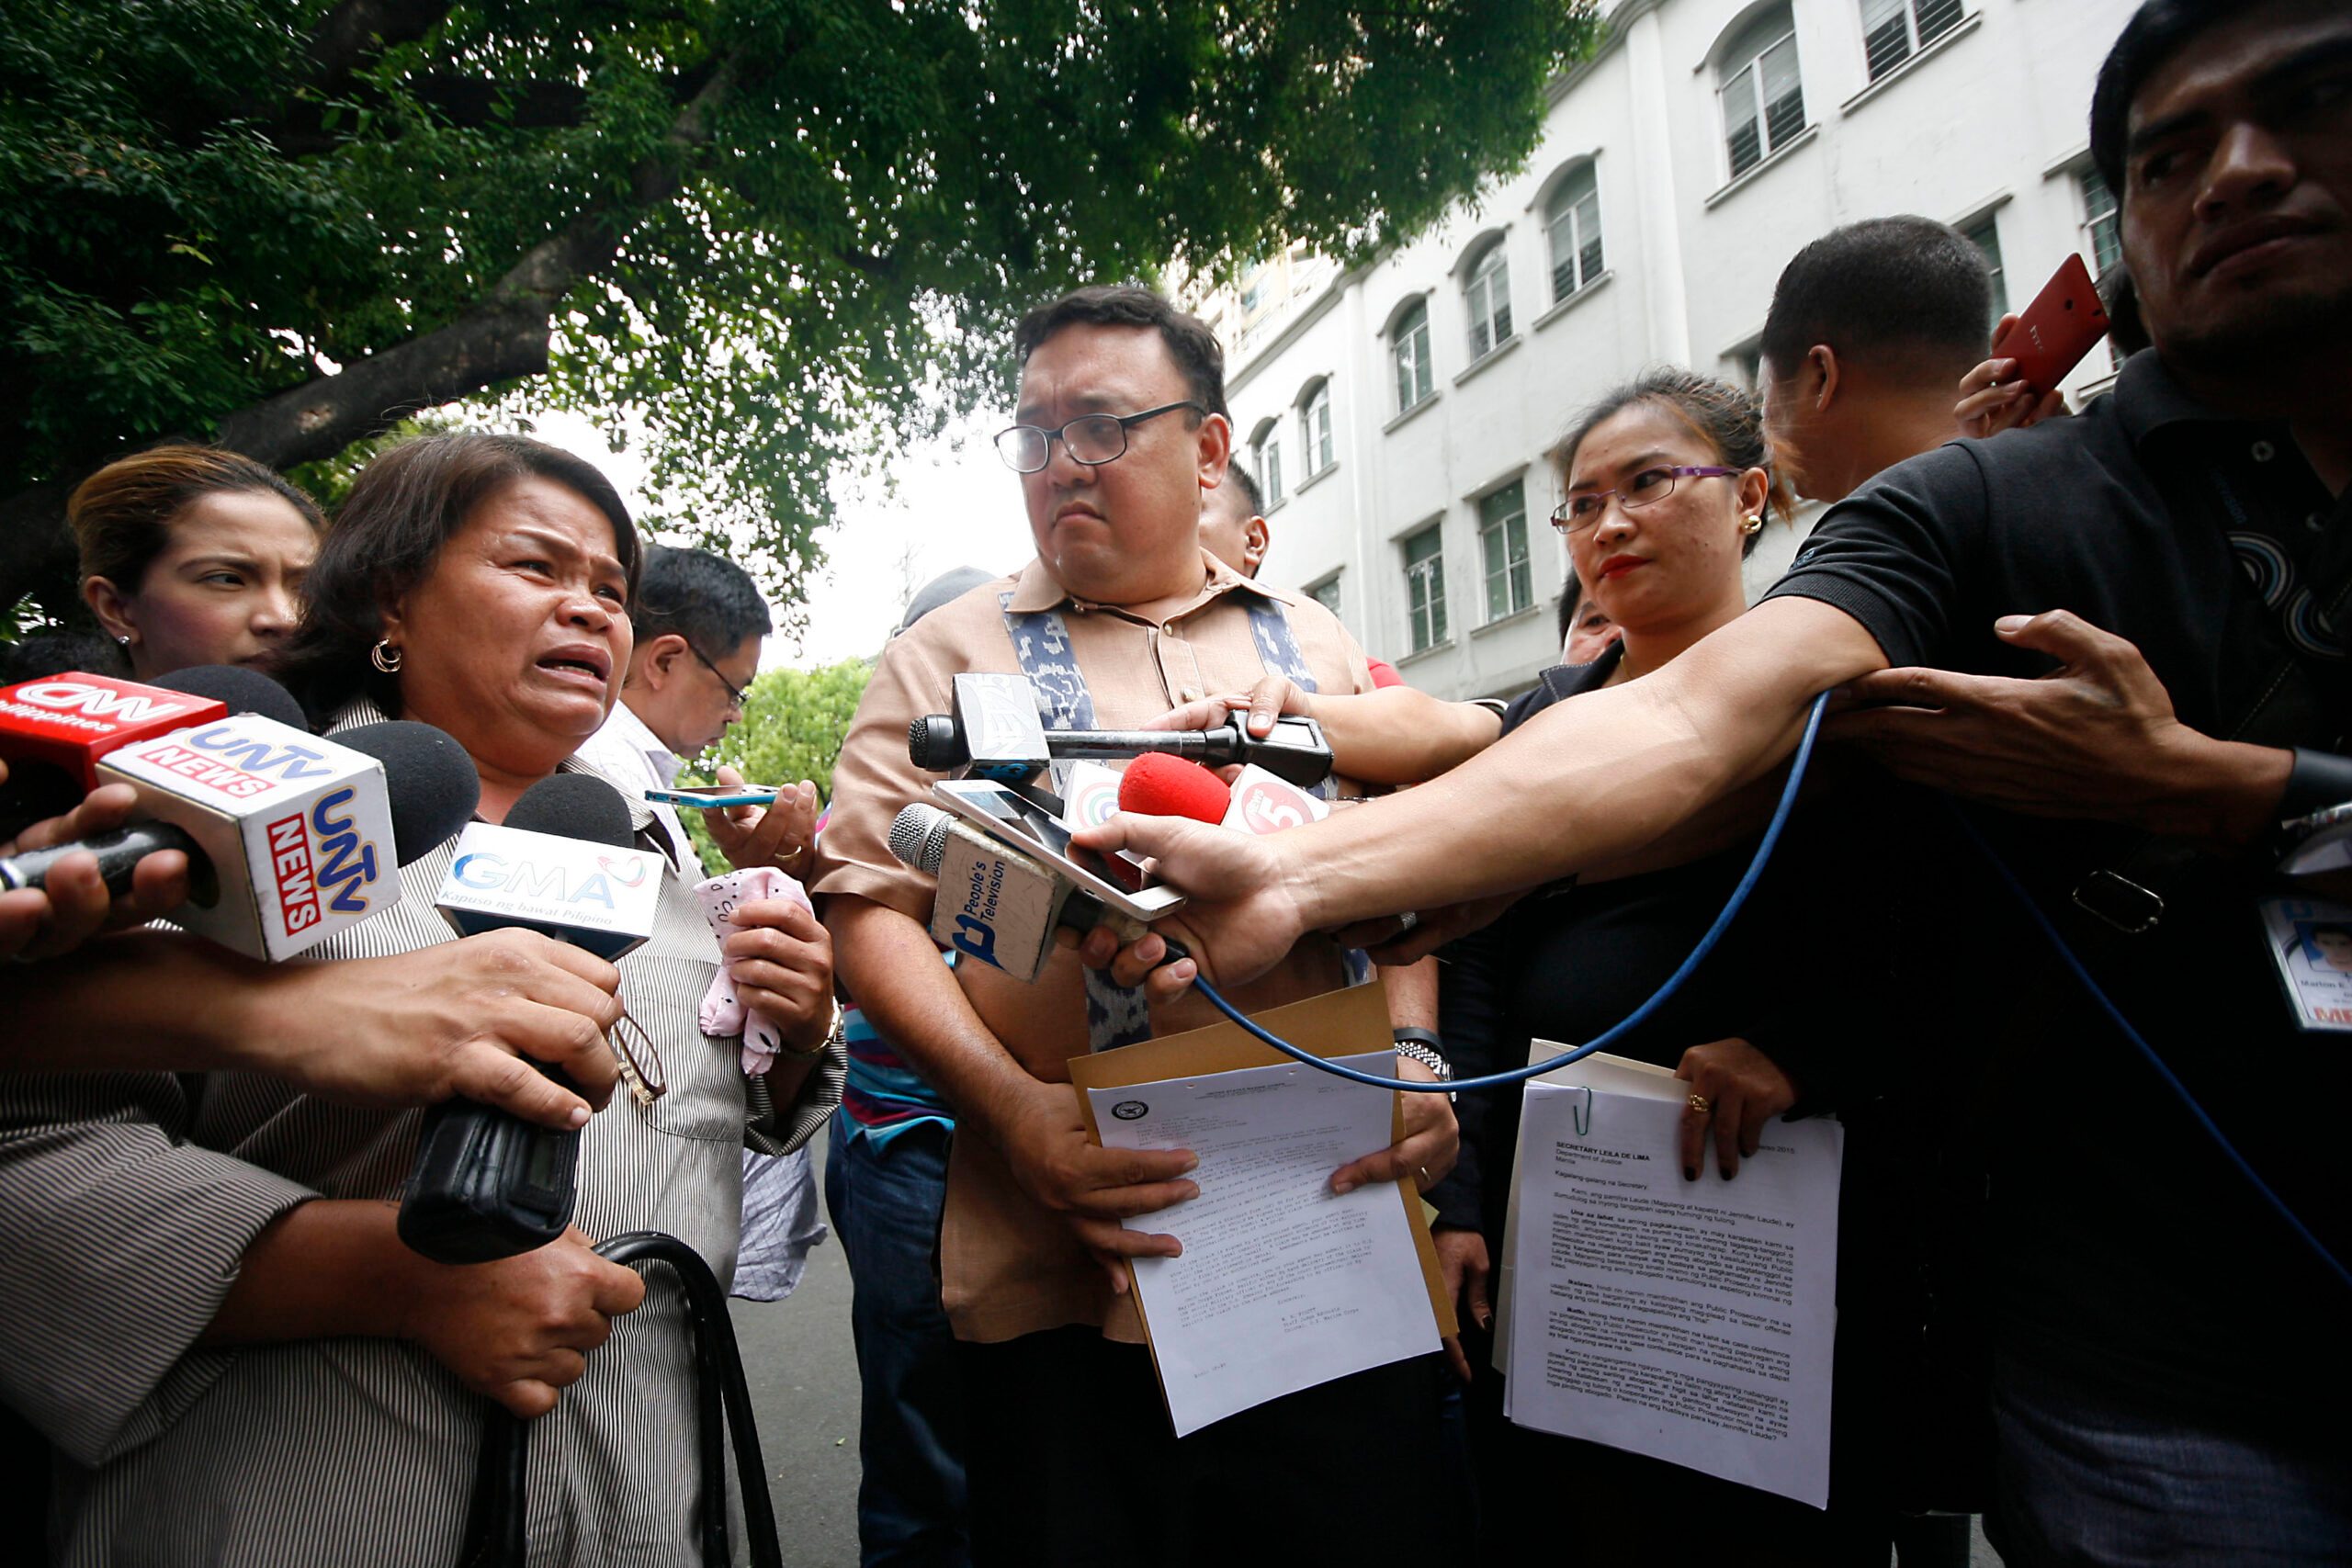 Pemberton’s conviction: ‘Incomplete victory’ for Laude family